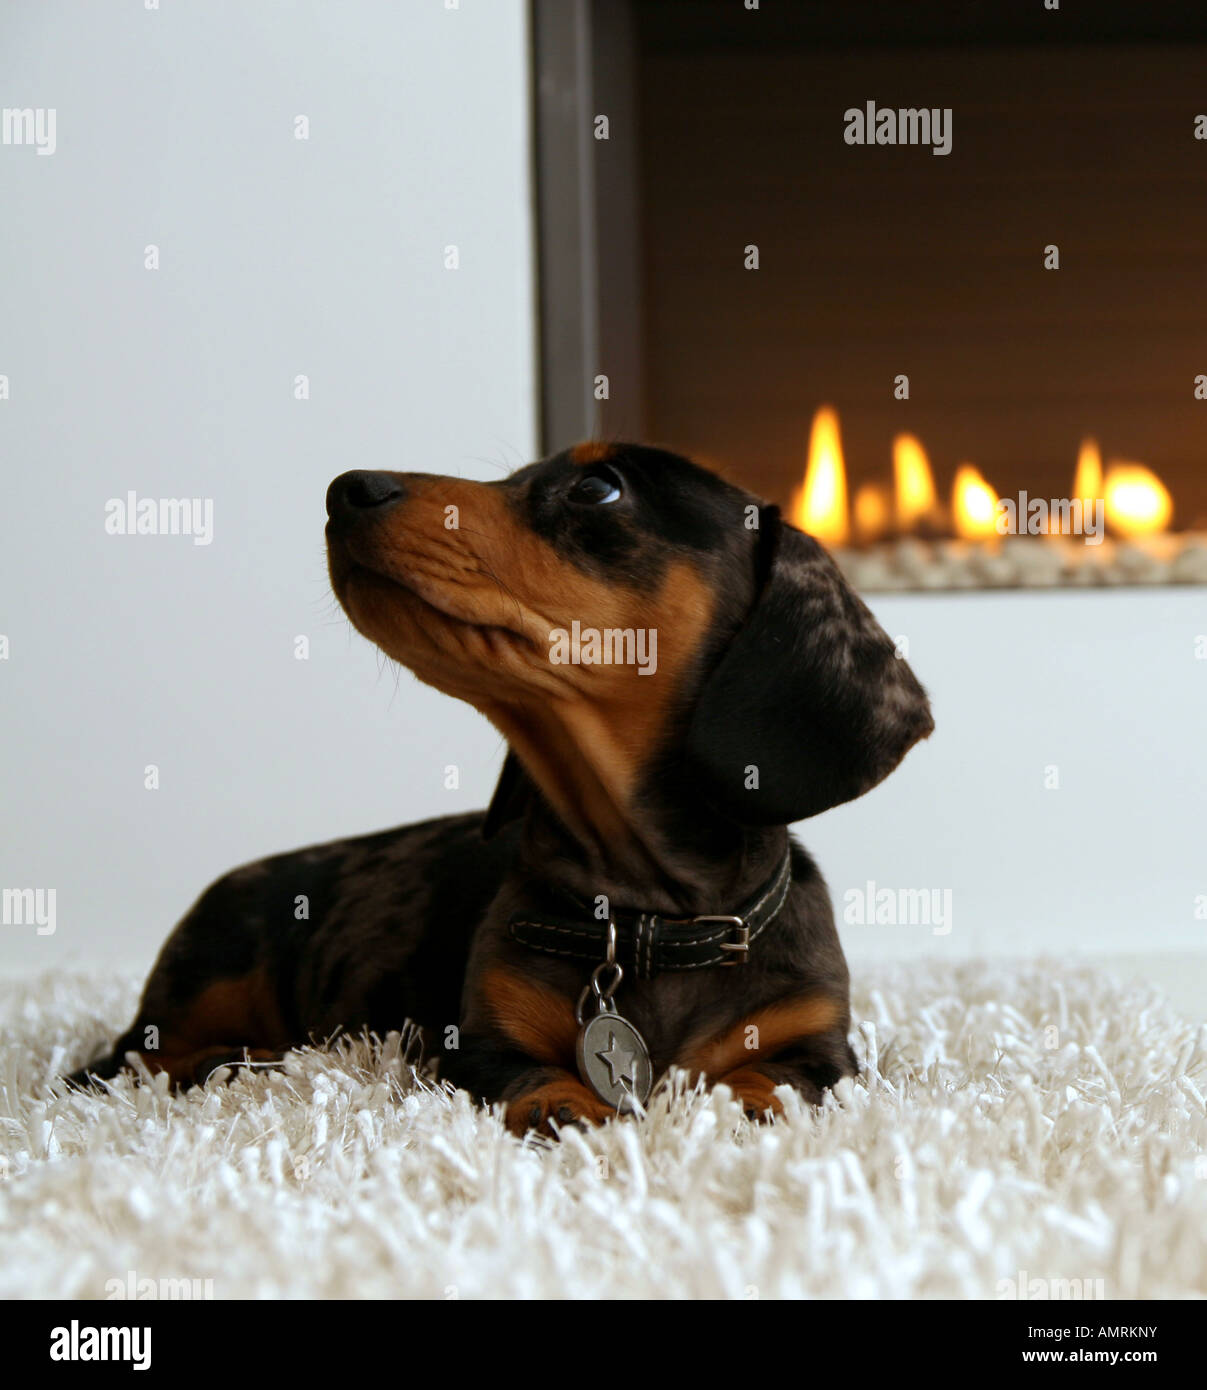 Miniature Dachshund puppy on white rug in front of fire Stock Photo